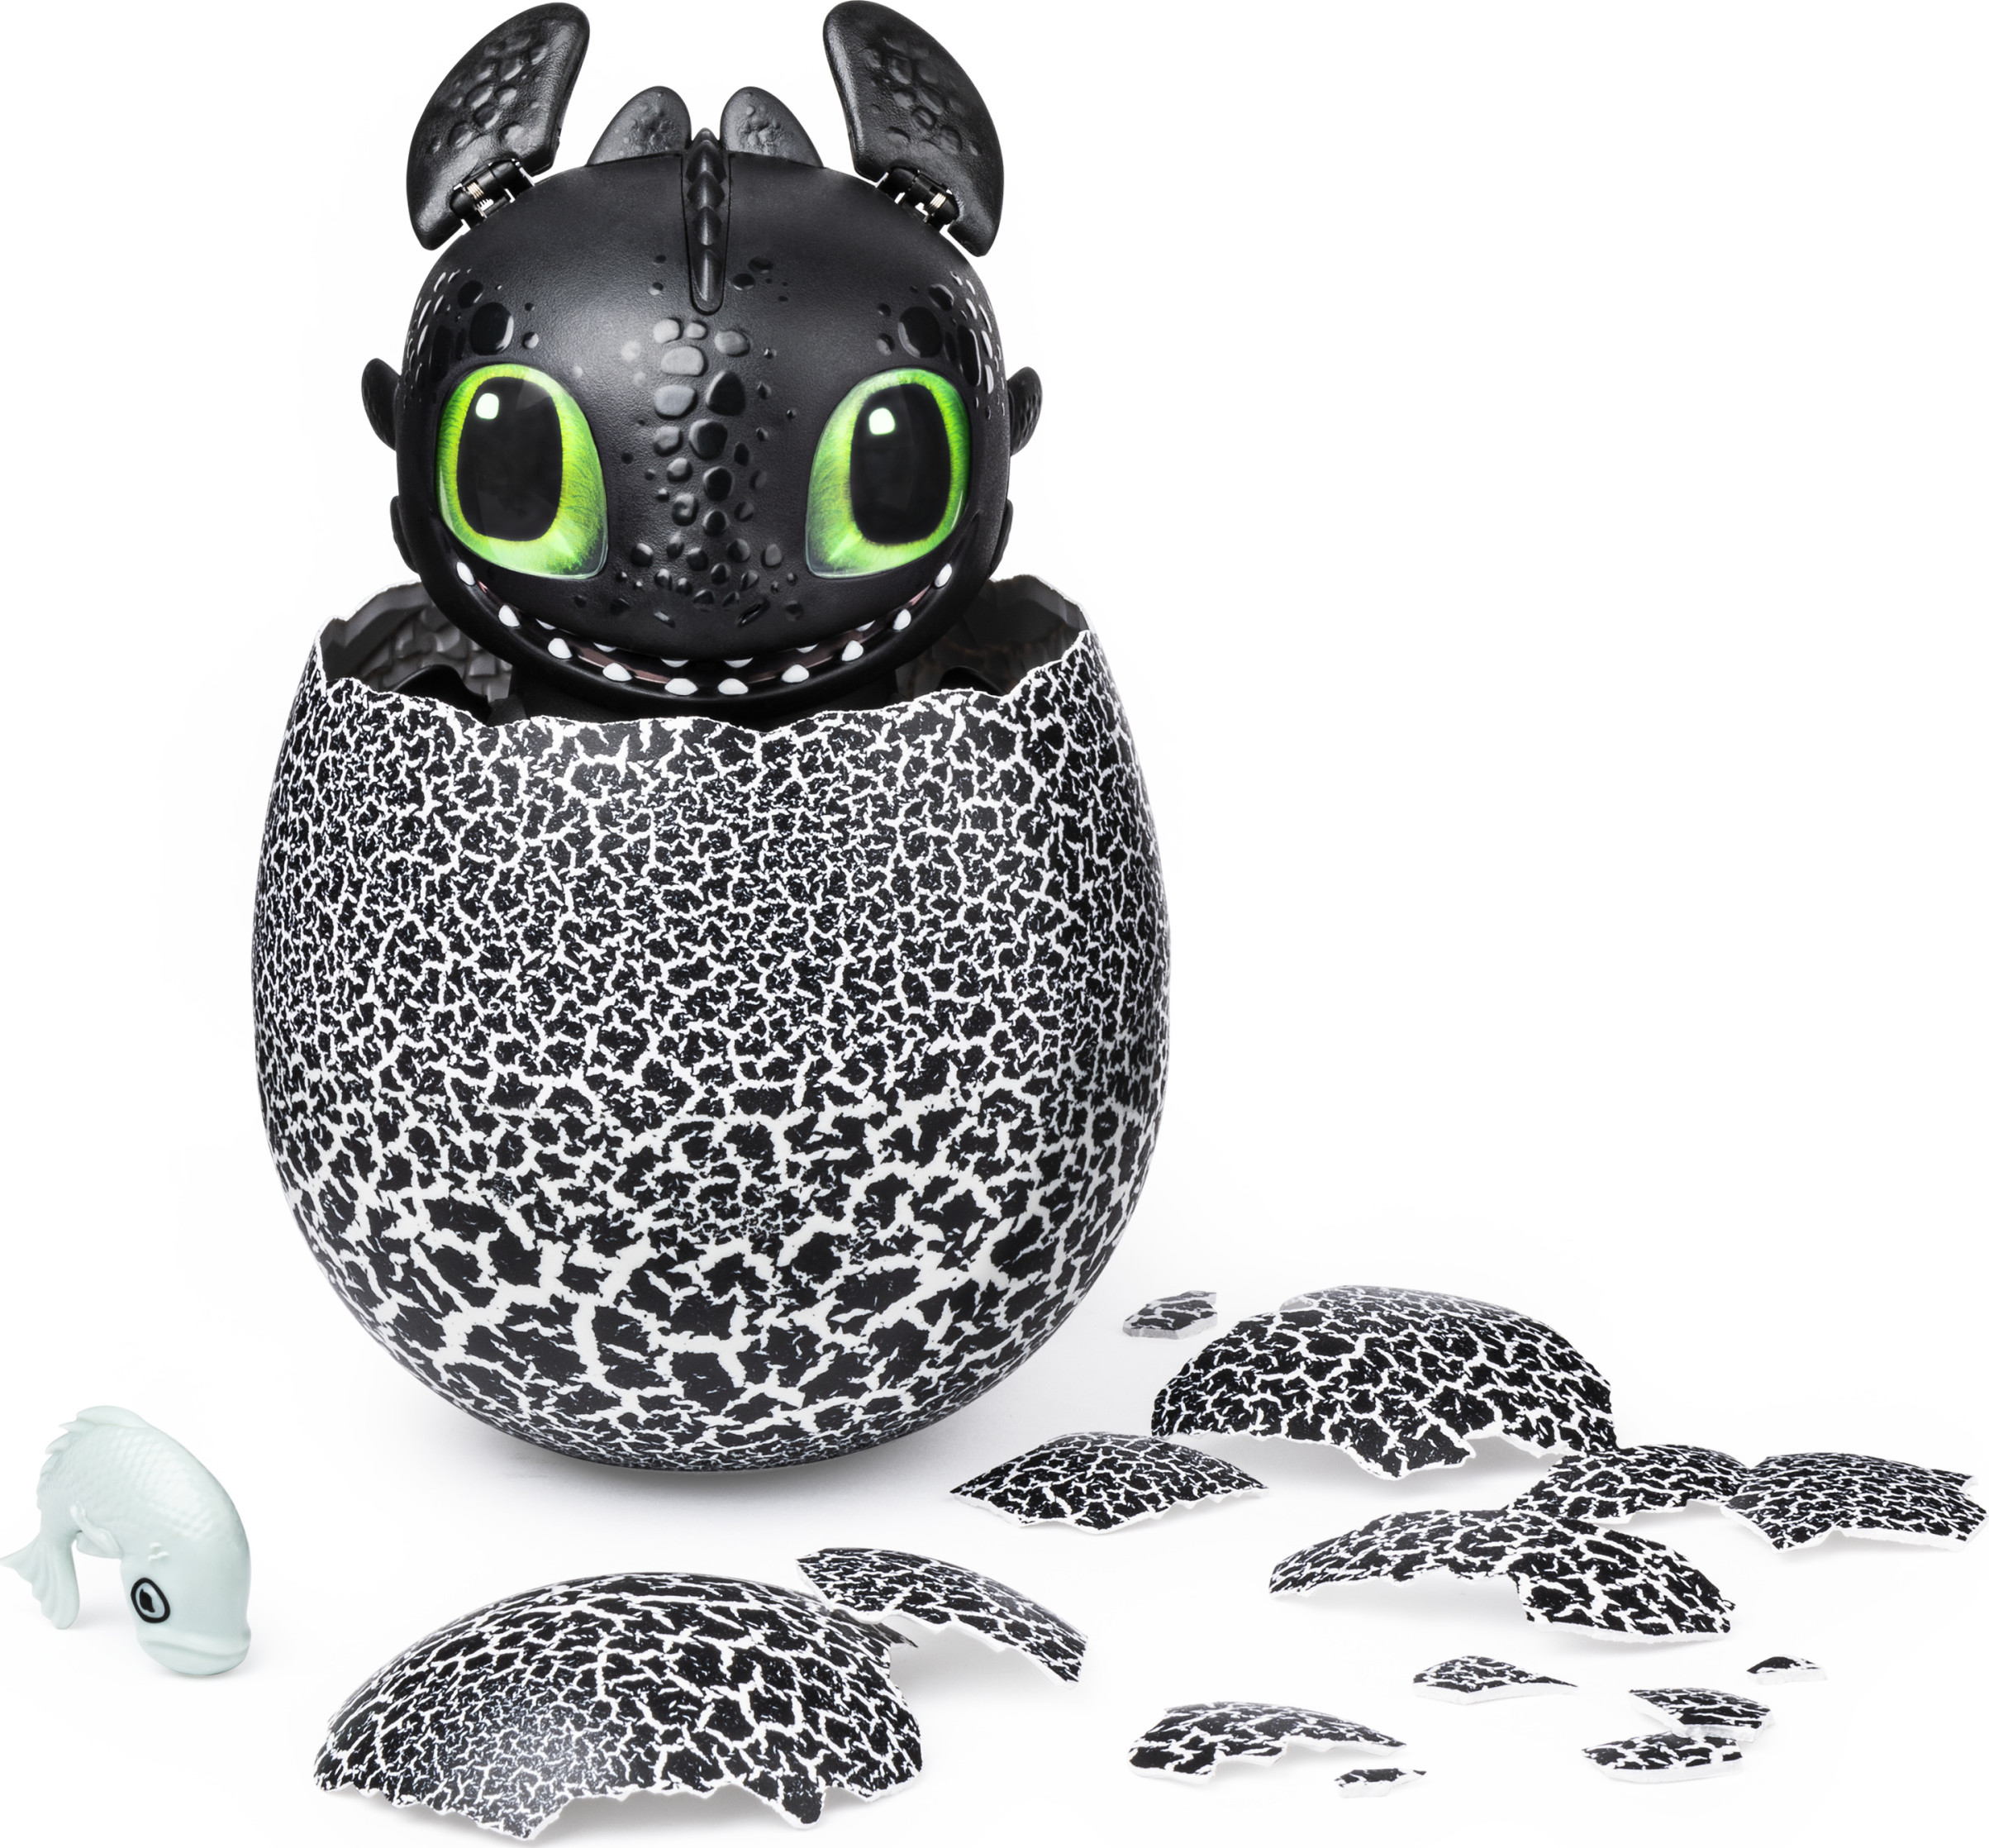 DreamWorks Dragons, Hatching Toothless Interactive Baby Dragon and Bonus Downloadable Episodes - image 1 of 8